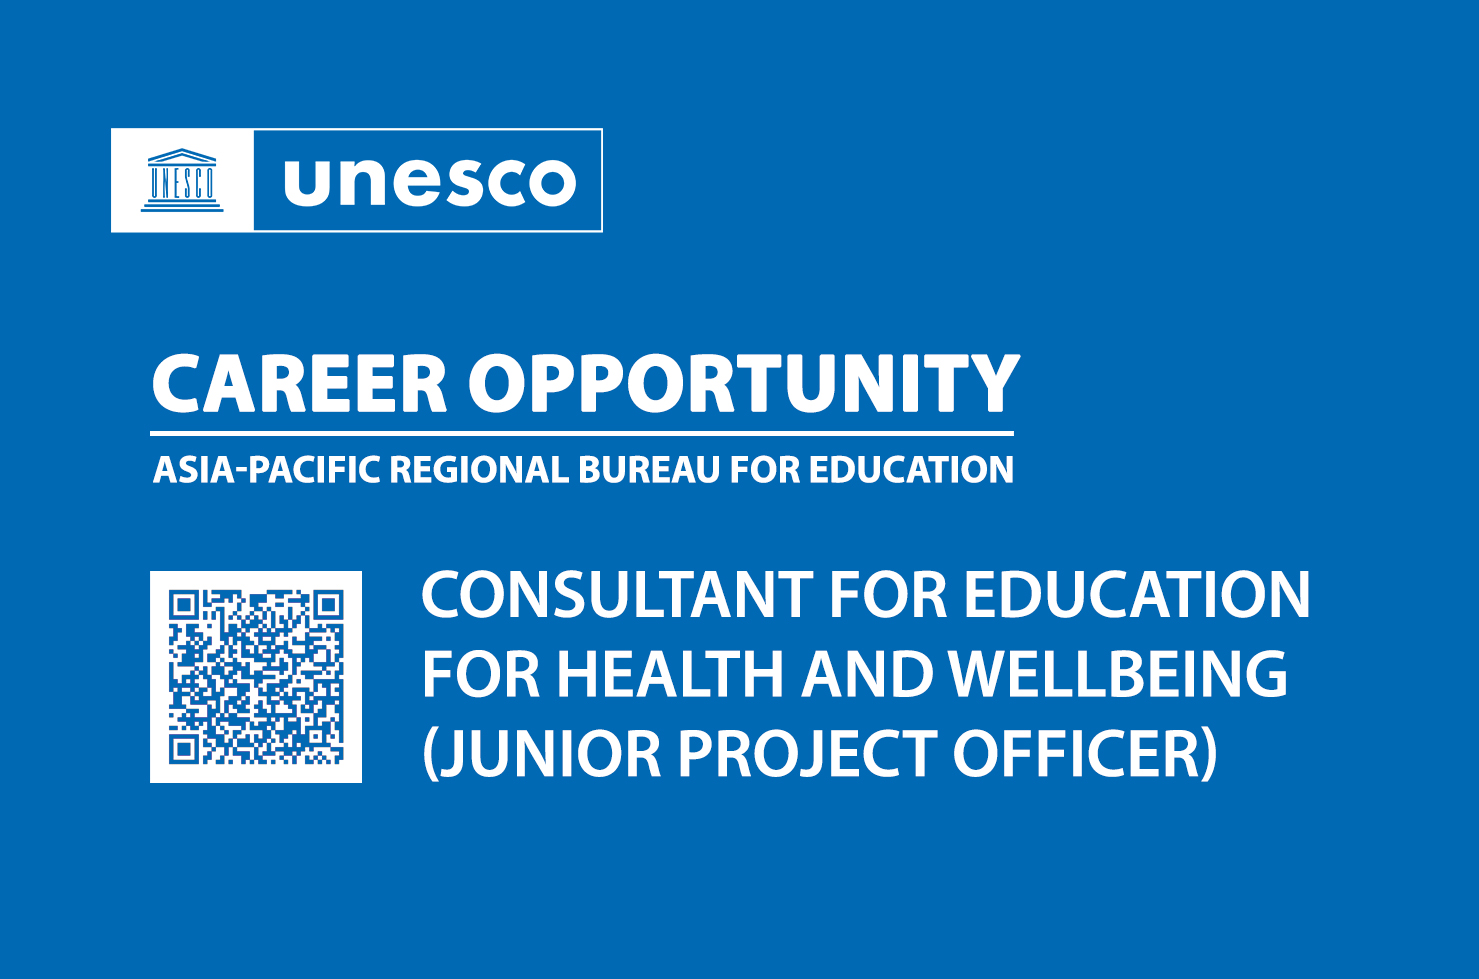 Call for Consultancy: Education for Health and Wellbeing (Junior Project Officer)